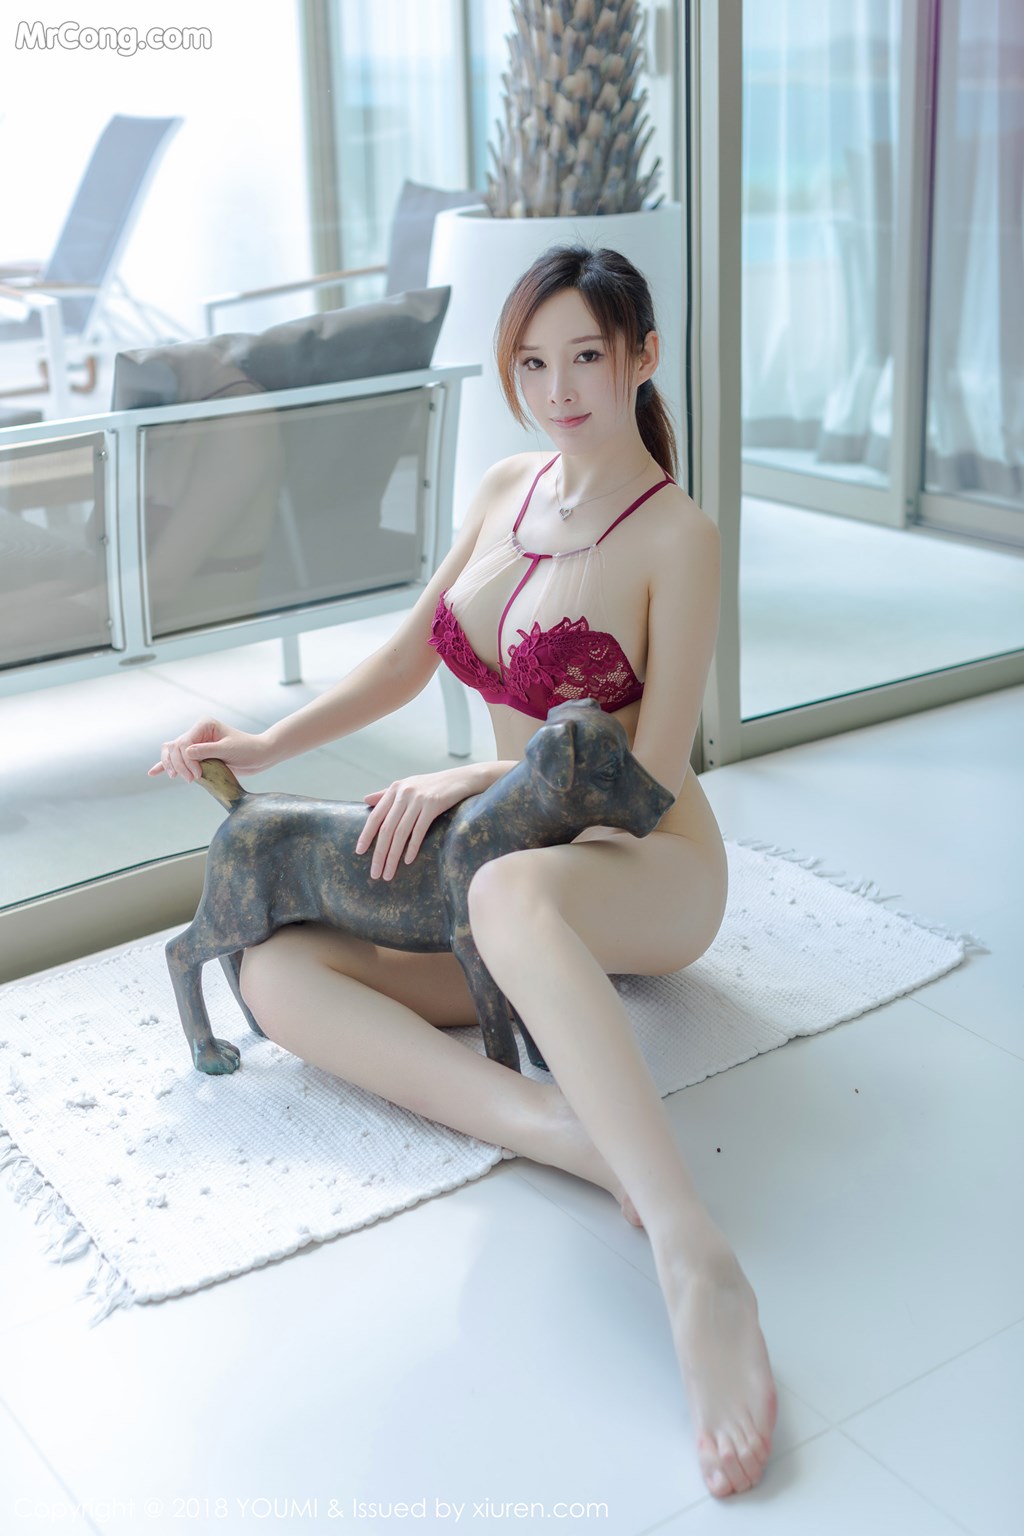 YouMi Vol.161: Model 土肥 圆 矮 挫 穷 (45 pictures)